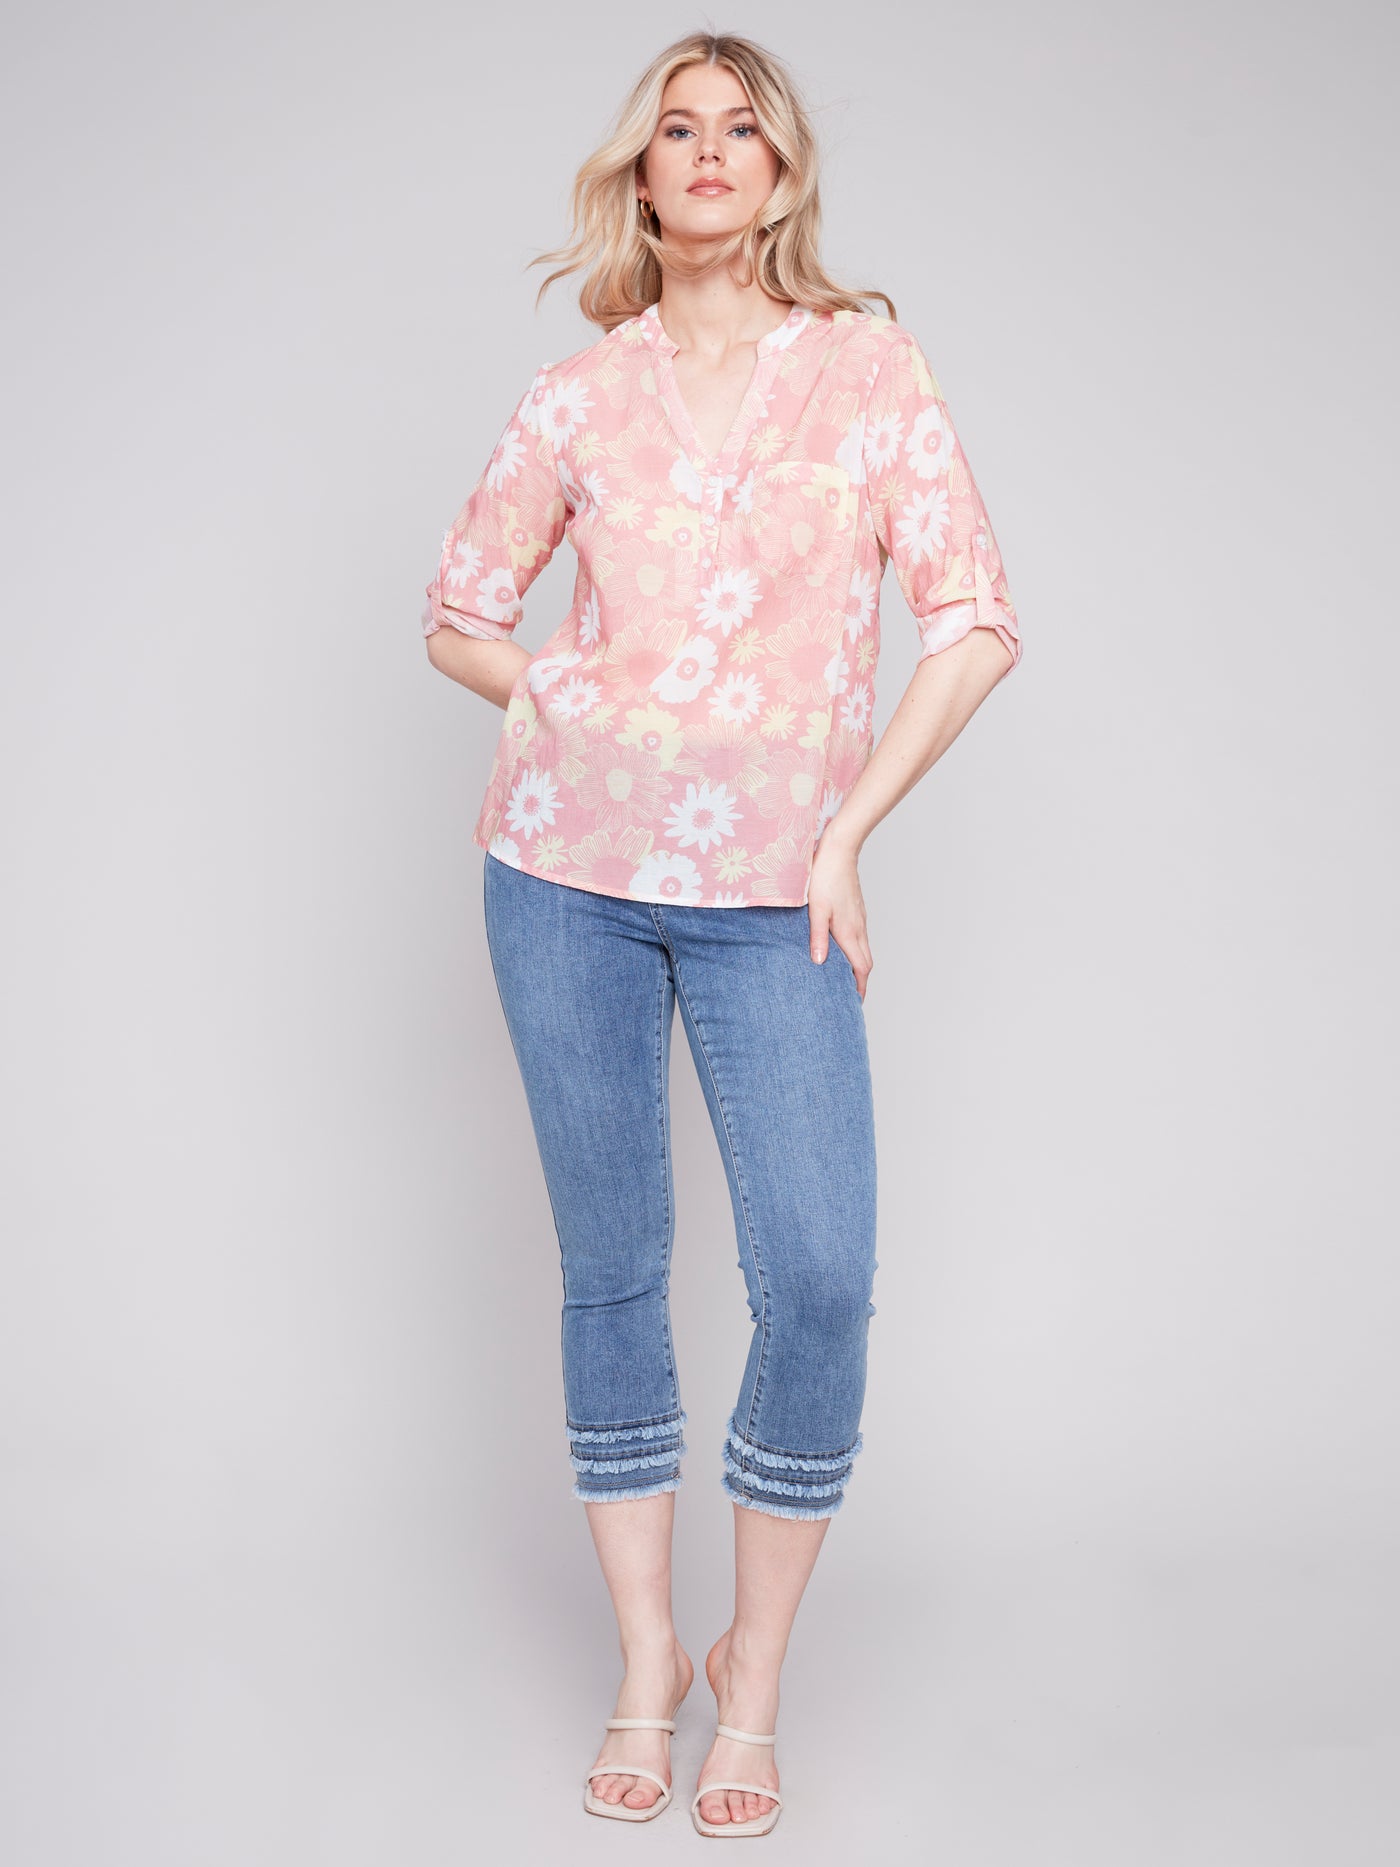 Charlie B Top - Lightweight Blouse - Cosmos